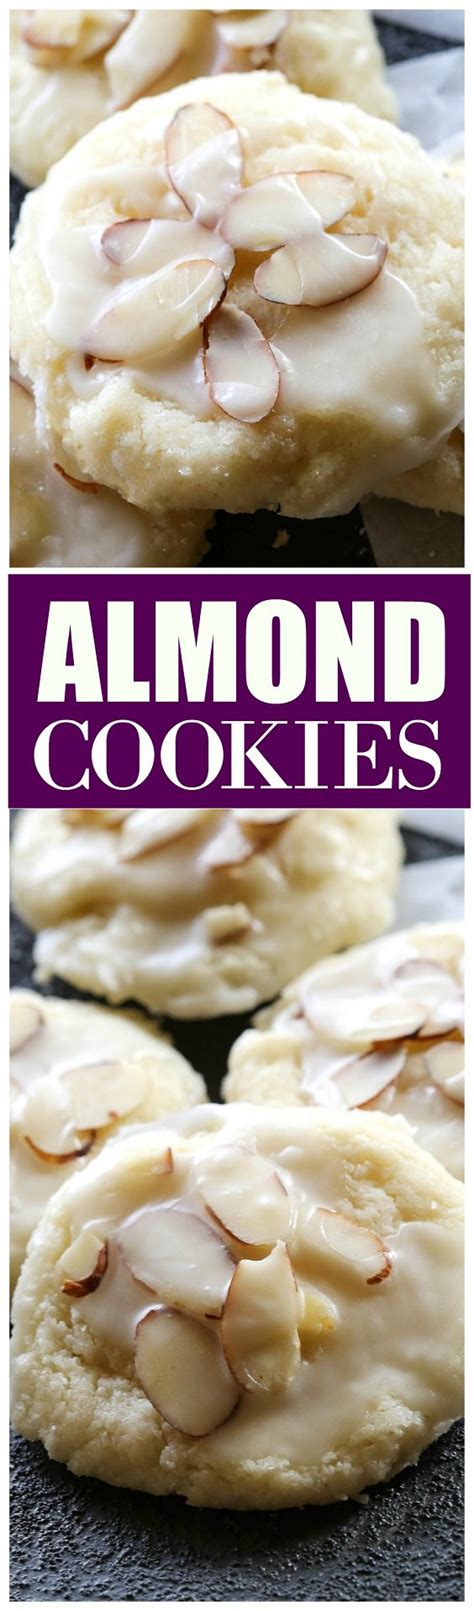 Delicious Almond Cookies ⋆ Food Curation